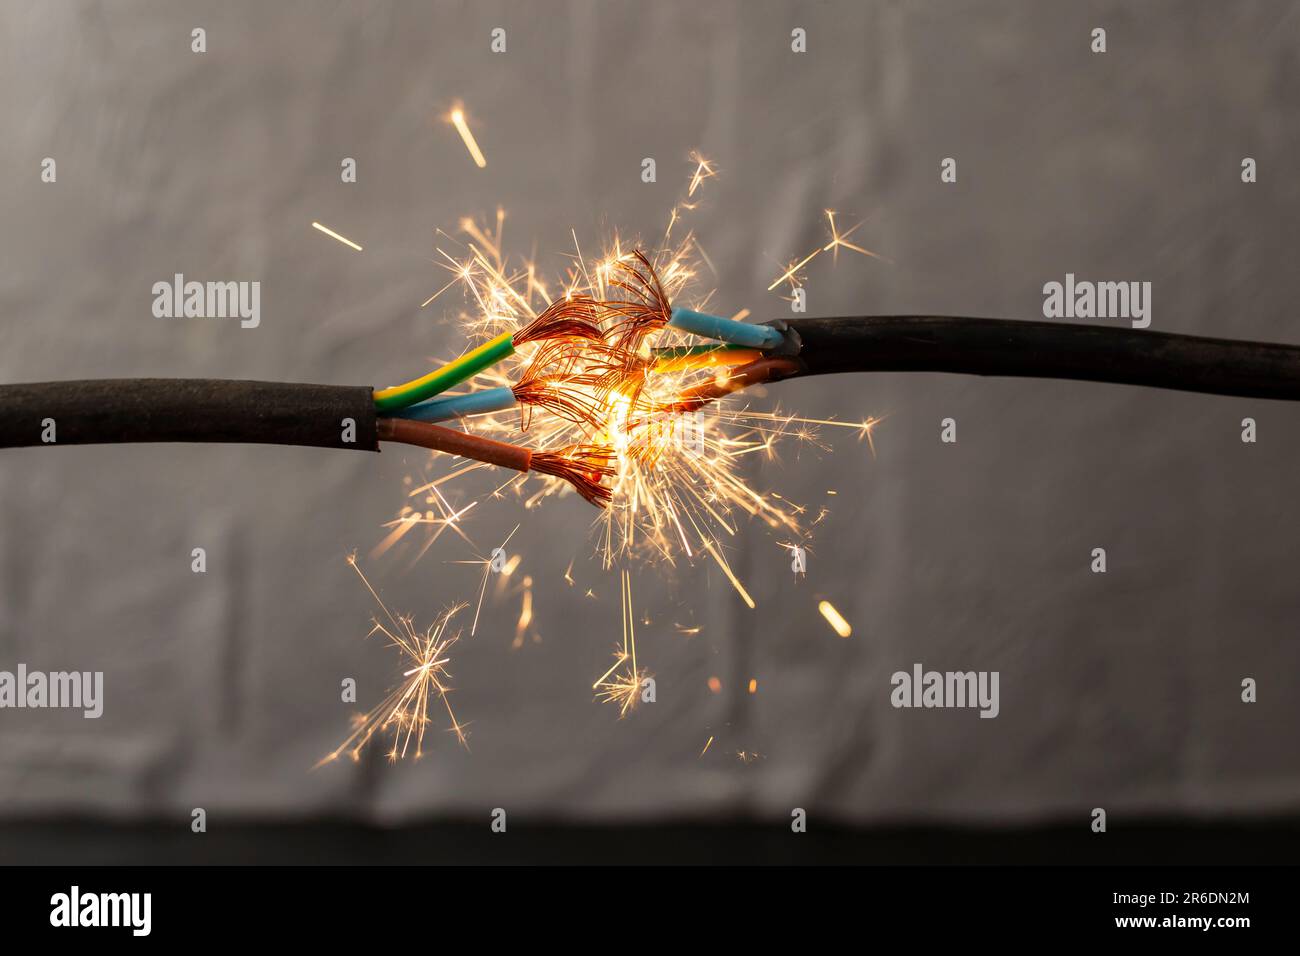 sparks explosion between electrical cables, fire hazard concept, soft focus close up Stock Photo